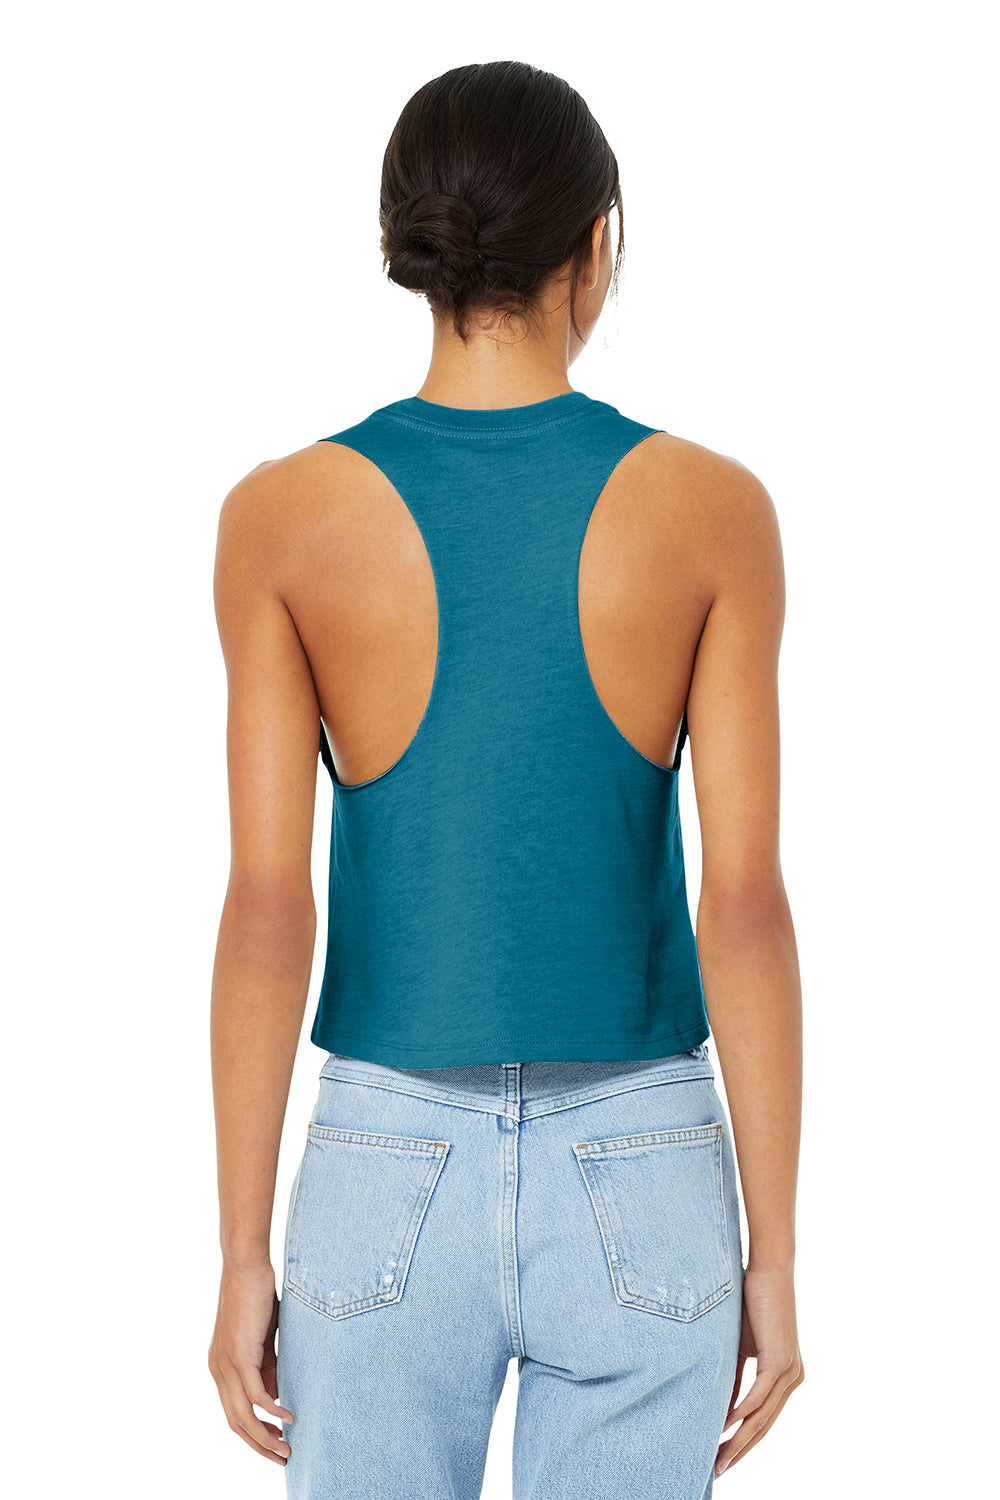 Bella + Canvas BC6682/6682 Womens Cropped Tank Top Heather Deep Teal Blue Model Back